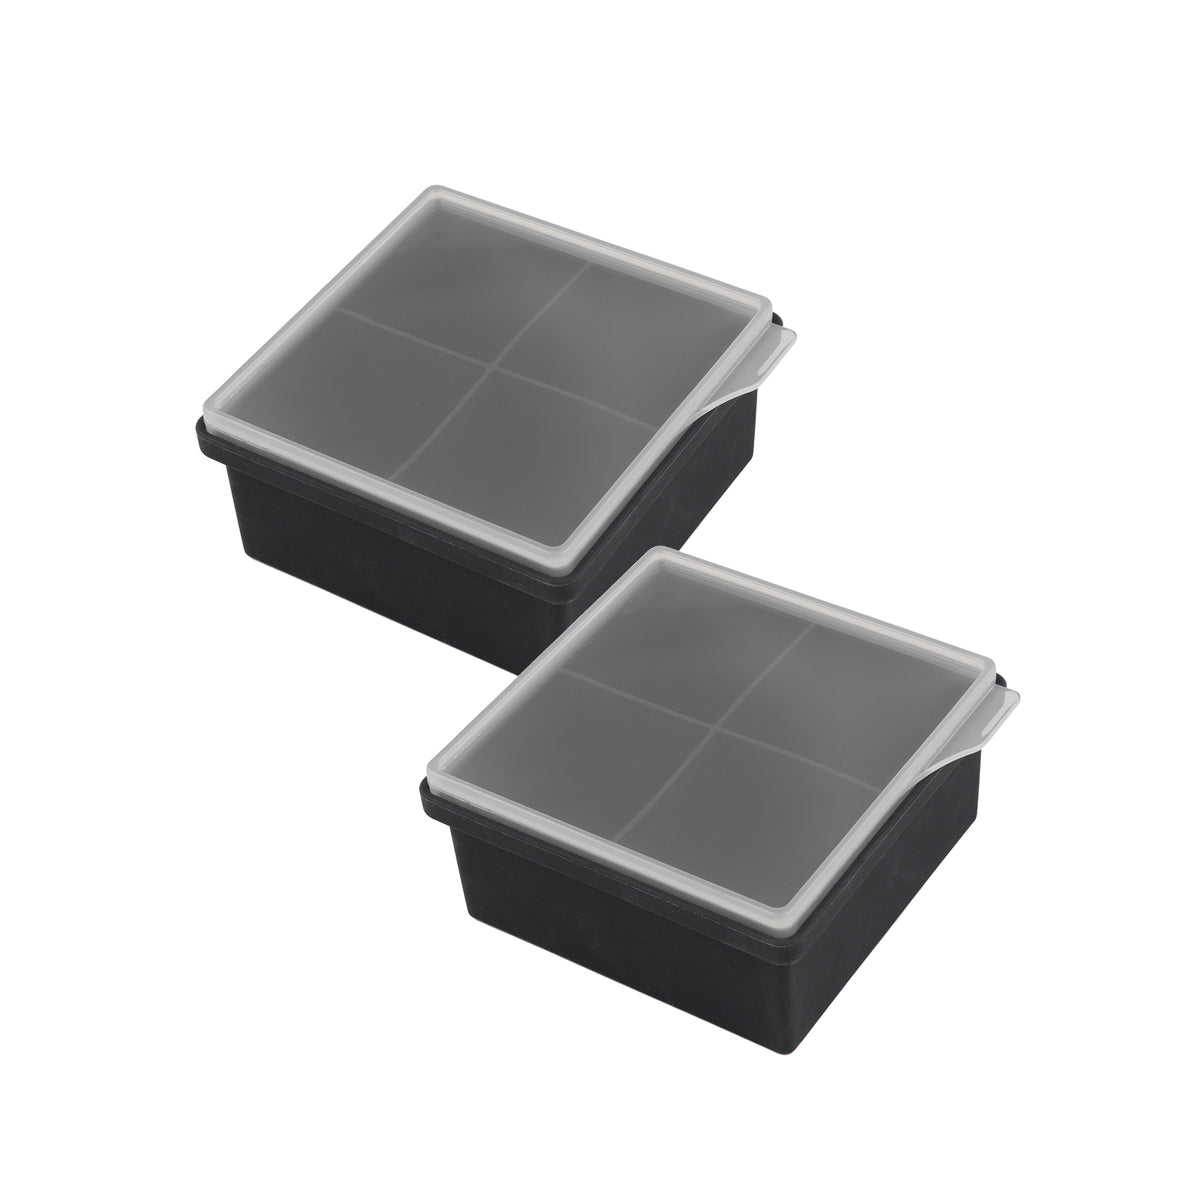 American Metalcraft SMSC4 Ice Mold 4-1/2L X 4-1/2W X 2H (4) 2 Square  Cubes